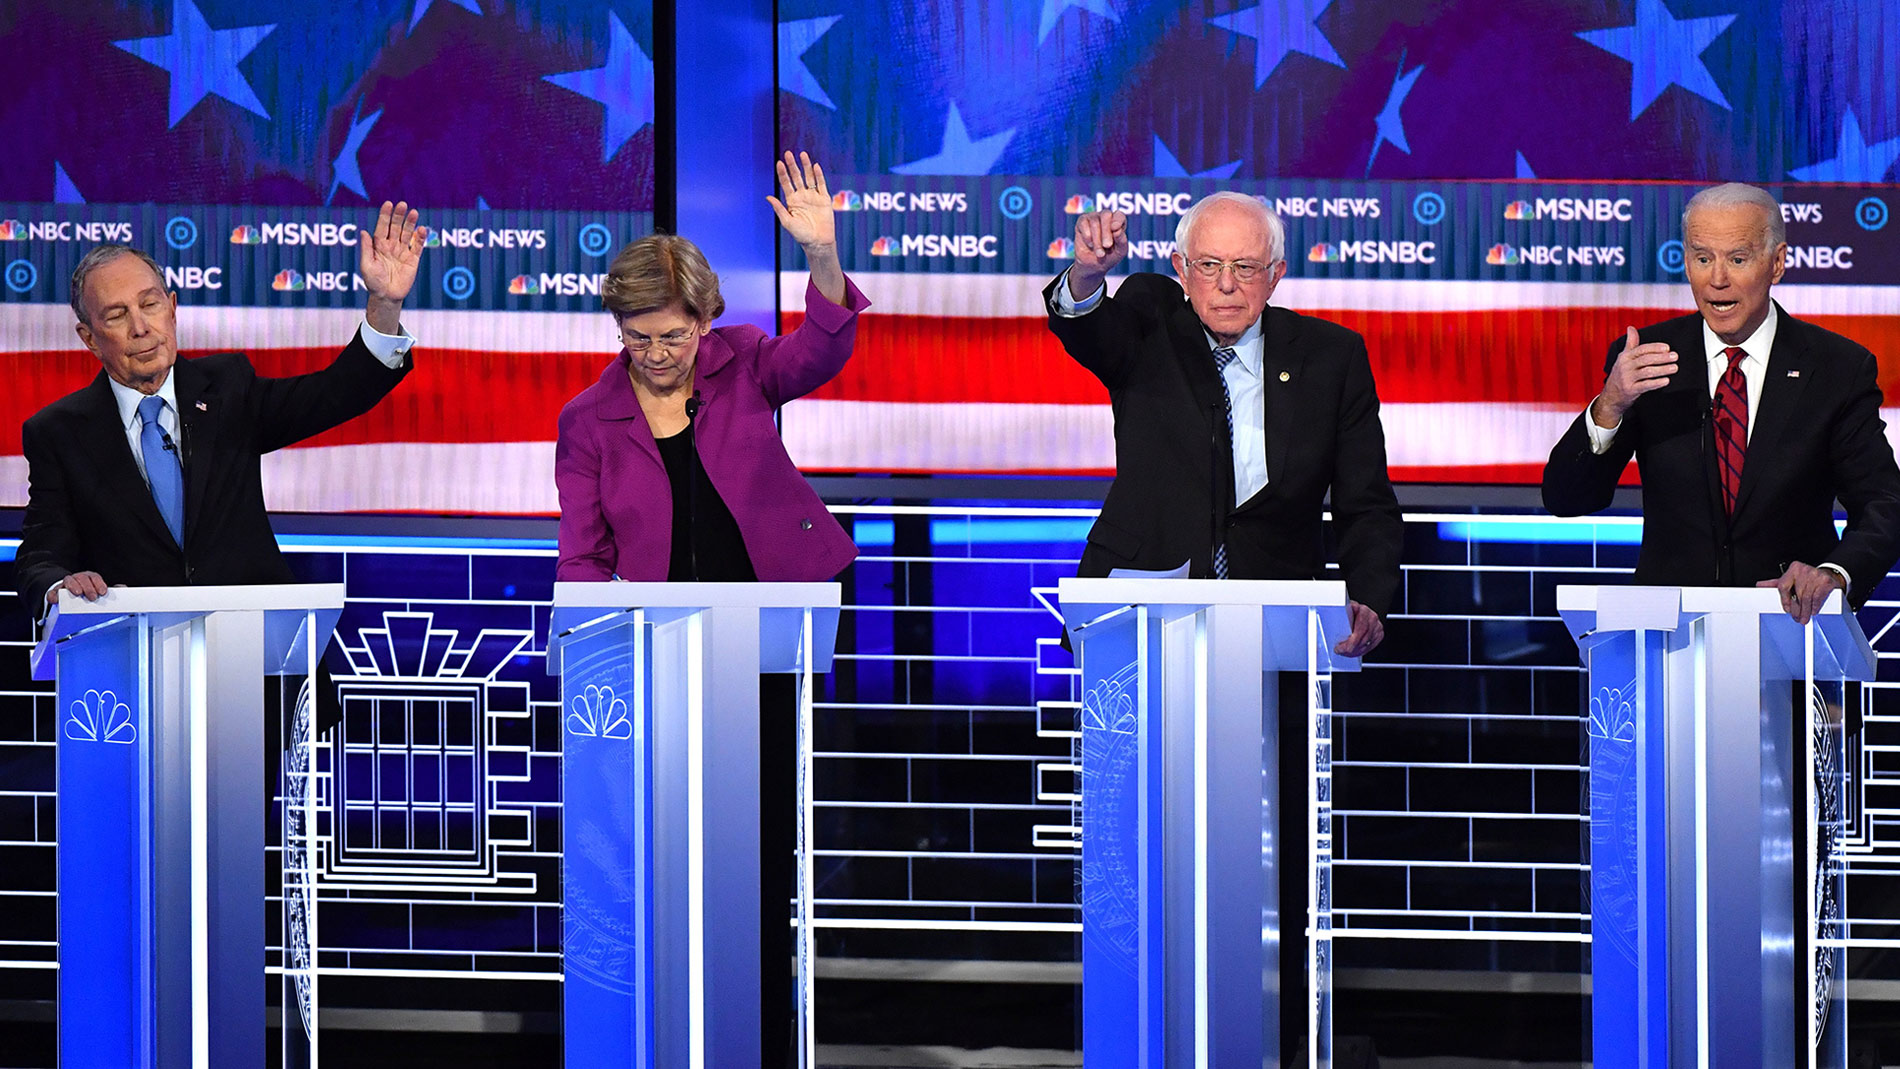 The ninth Democratic primary debate of the 2020 presidential campaign season